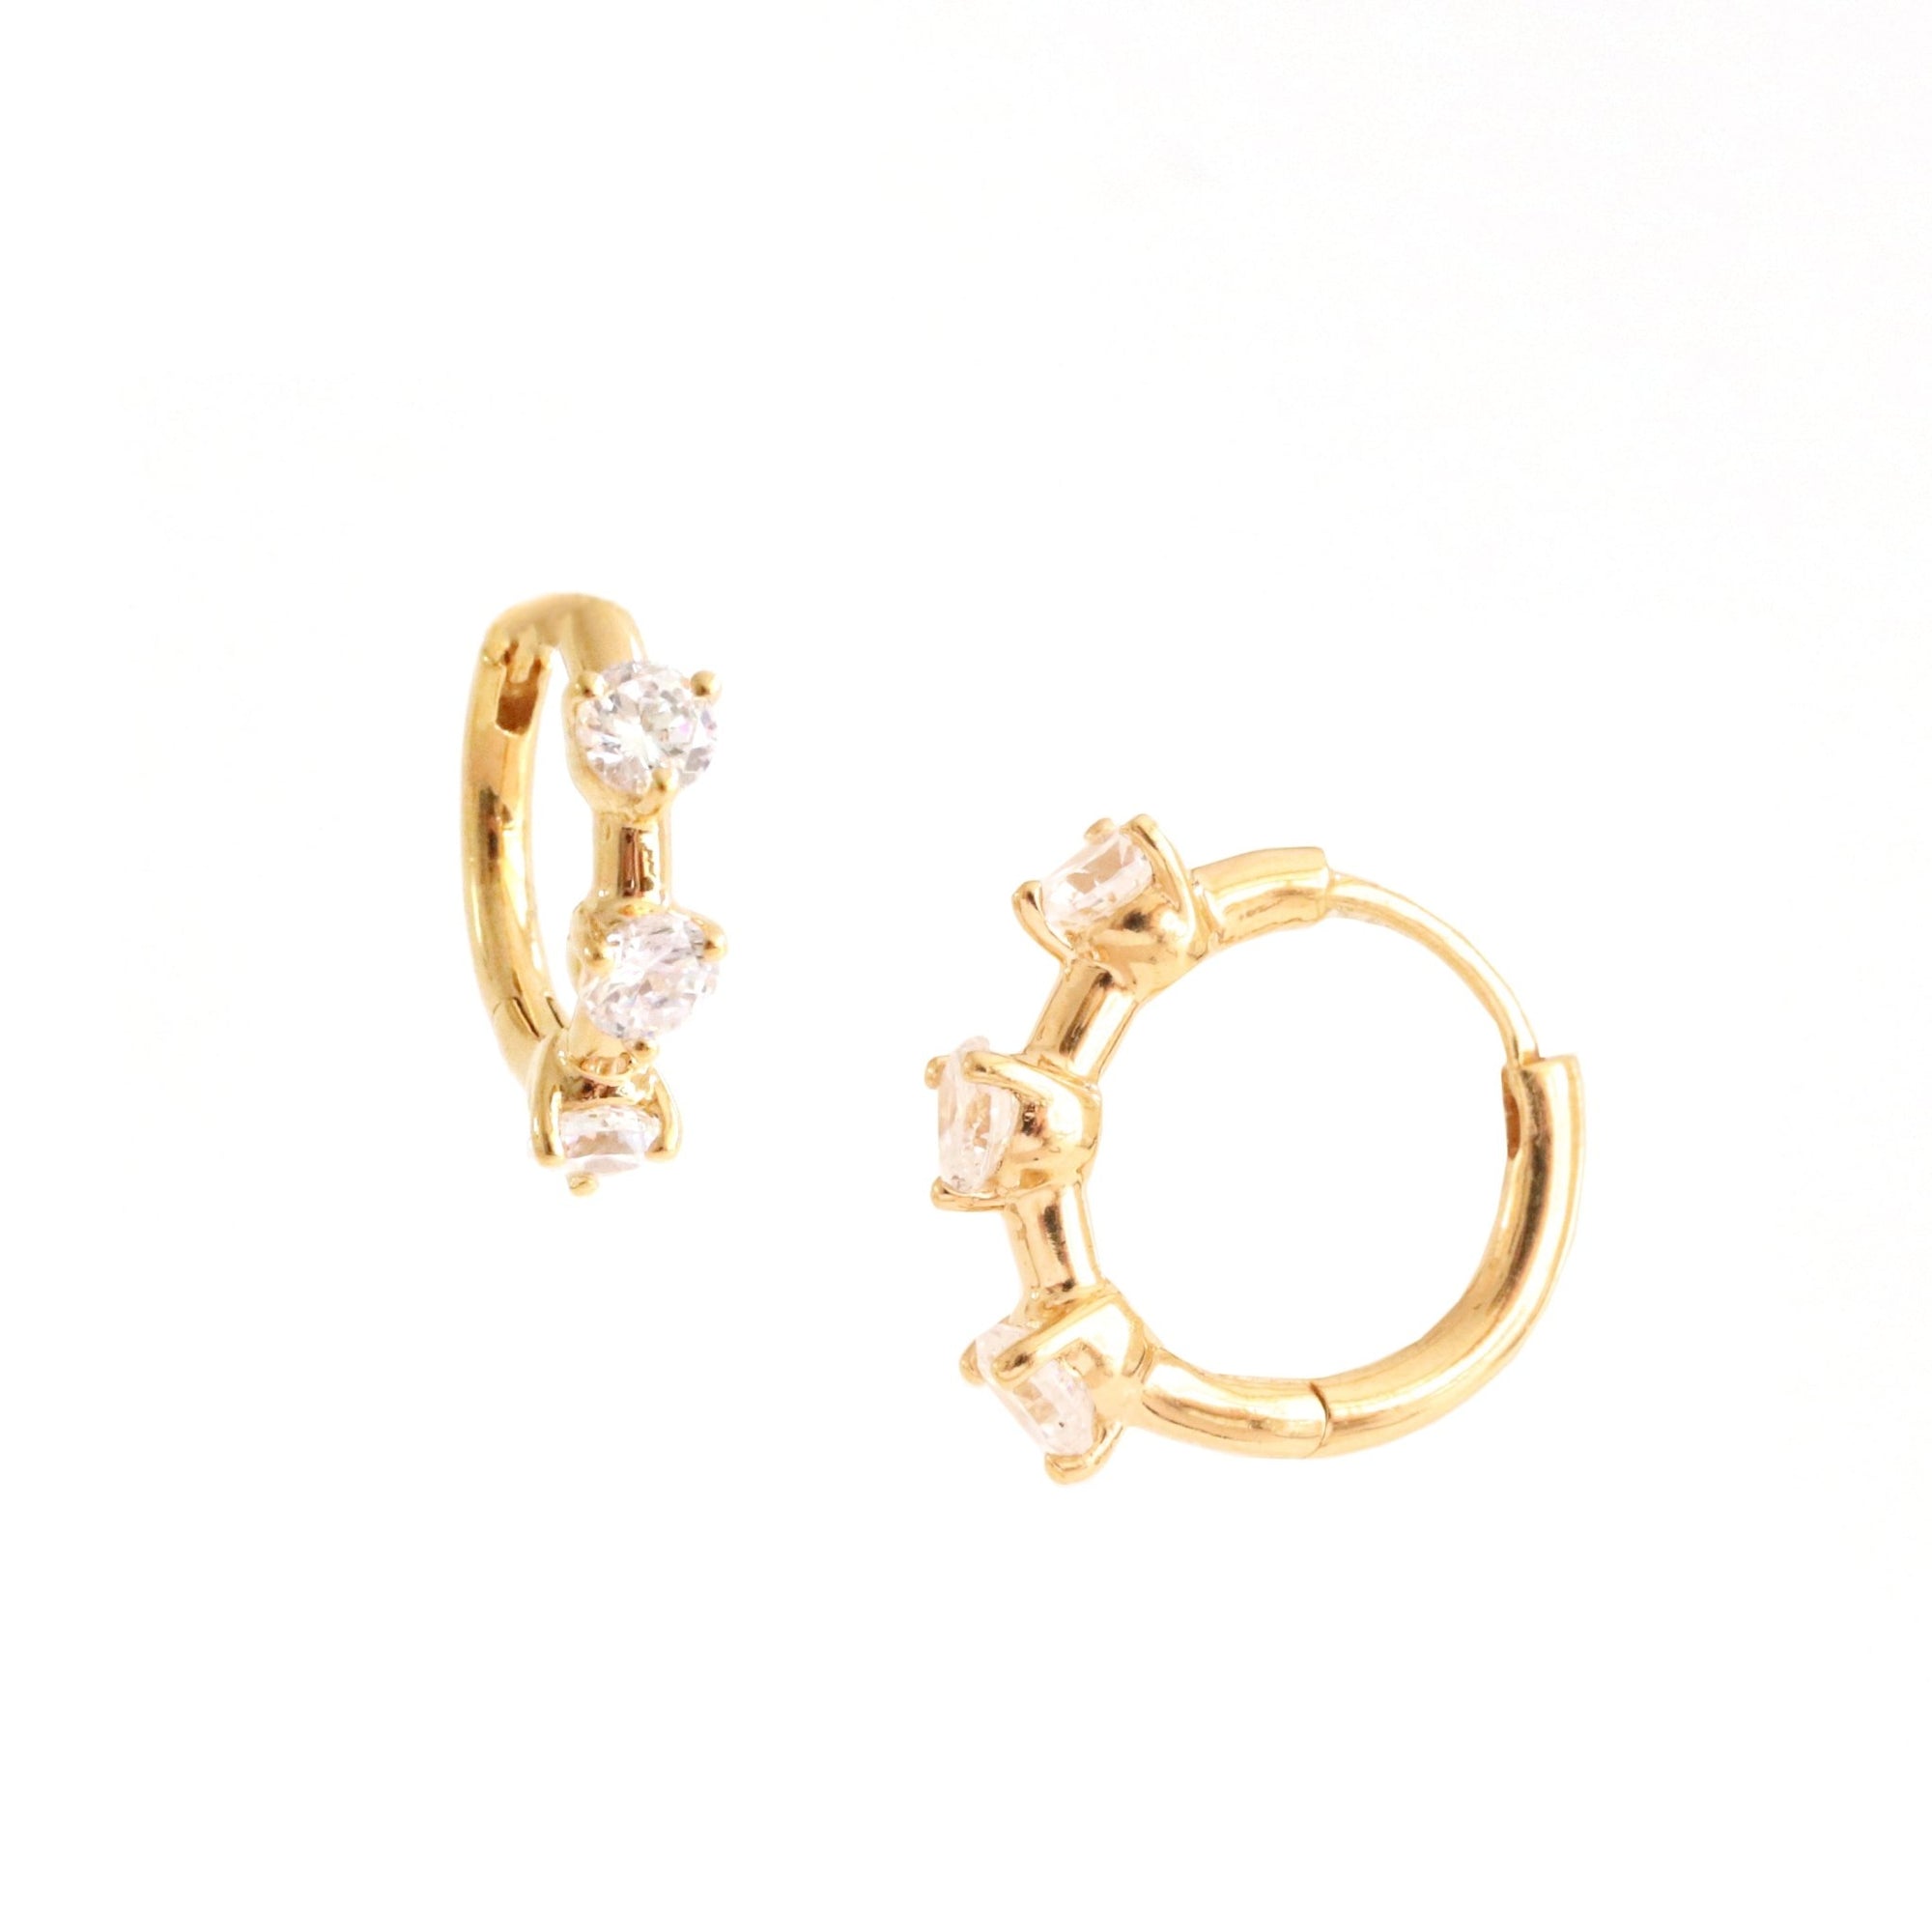 SCATTERED LOVE HUGGIE HOOPS - CUBIC ZIRCONIA & GOLD - SO PRETTY CARA COTTER